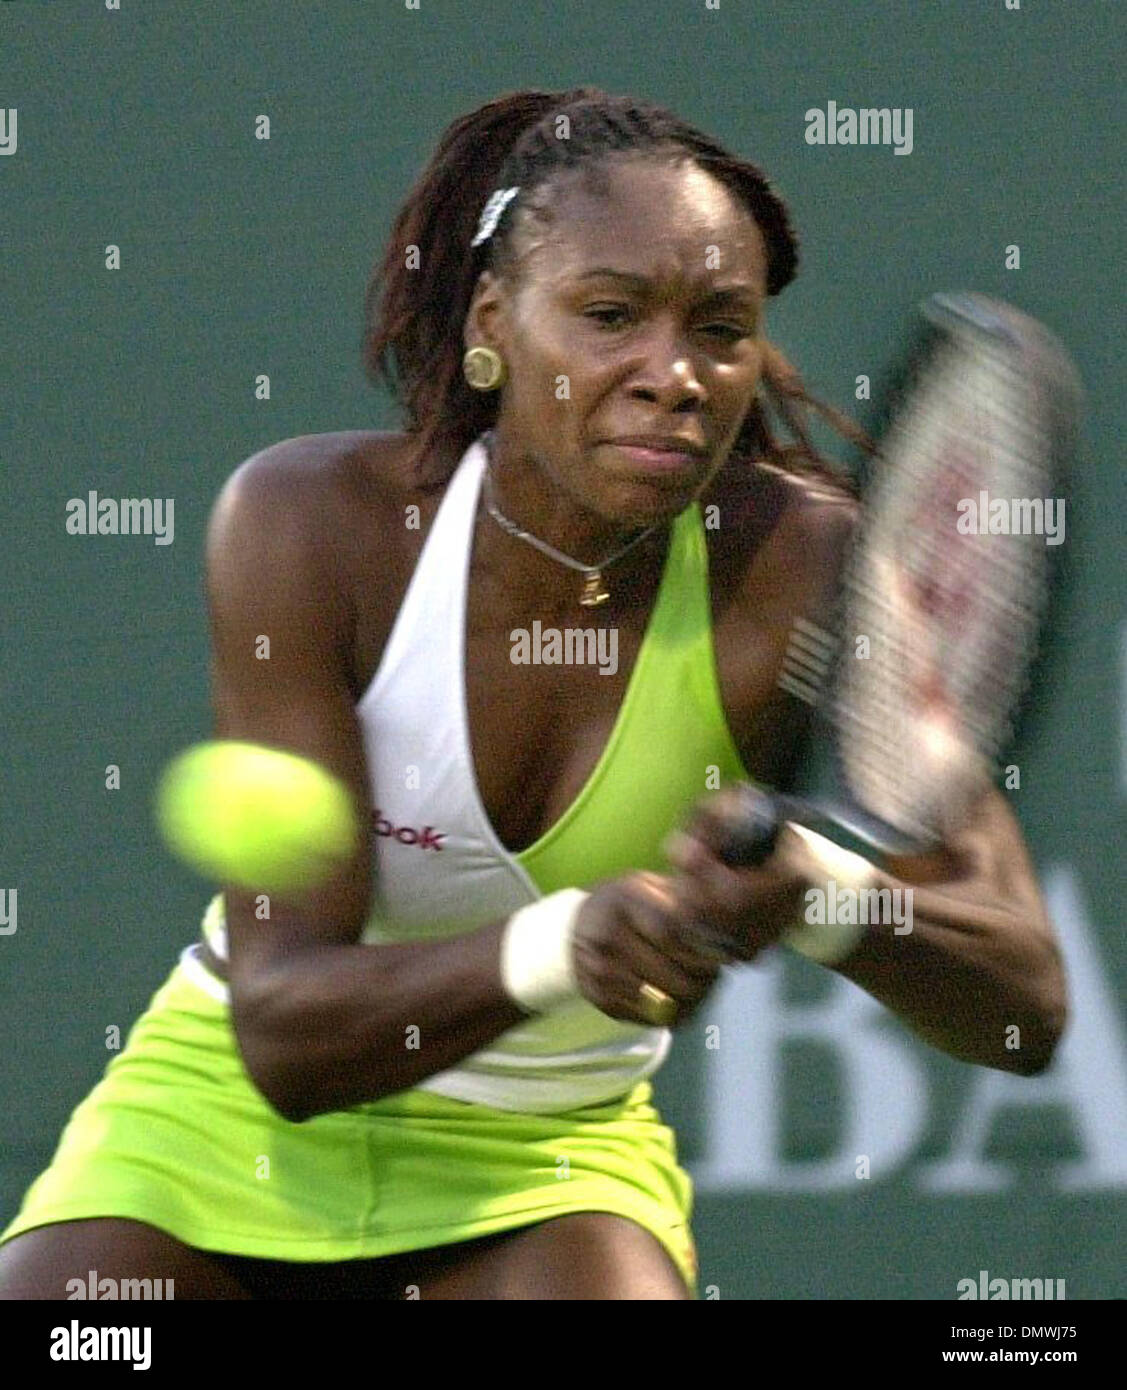 Jul 26, 2001; Palo Alto, CA, USA; Venus Williams  returns the ball during her Bank of the West Classic tennis match against Kristina Brandi  in Palo Alto Calif., on Thursday, July 26, 2001. Stock Photo